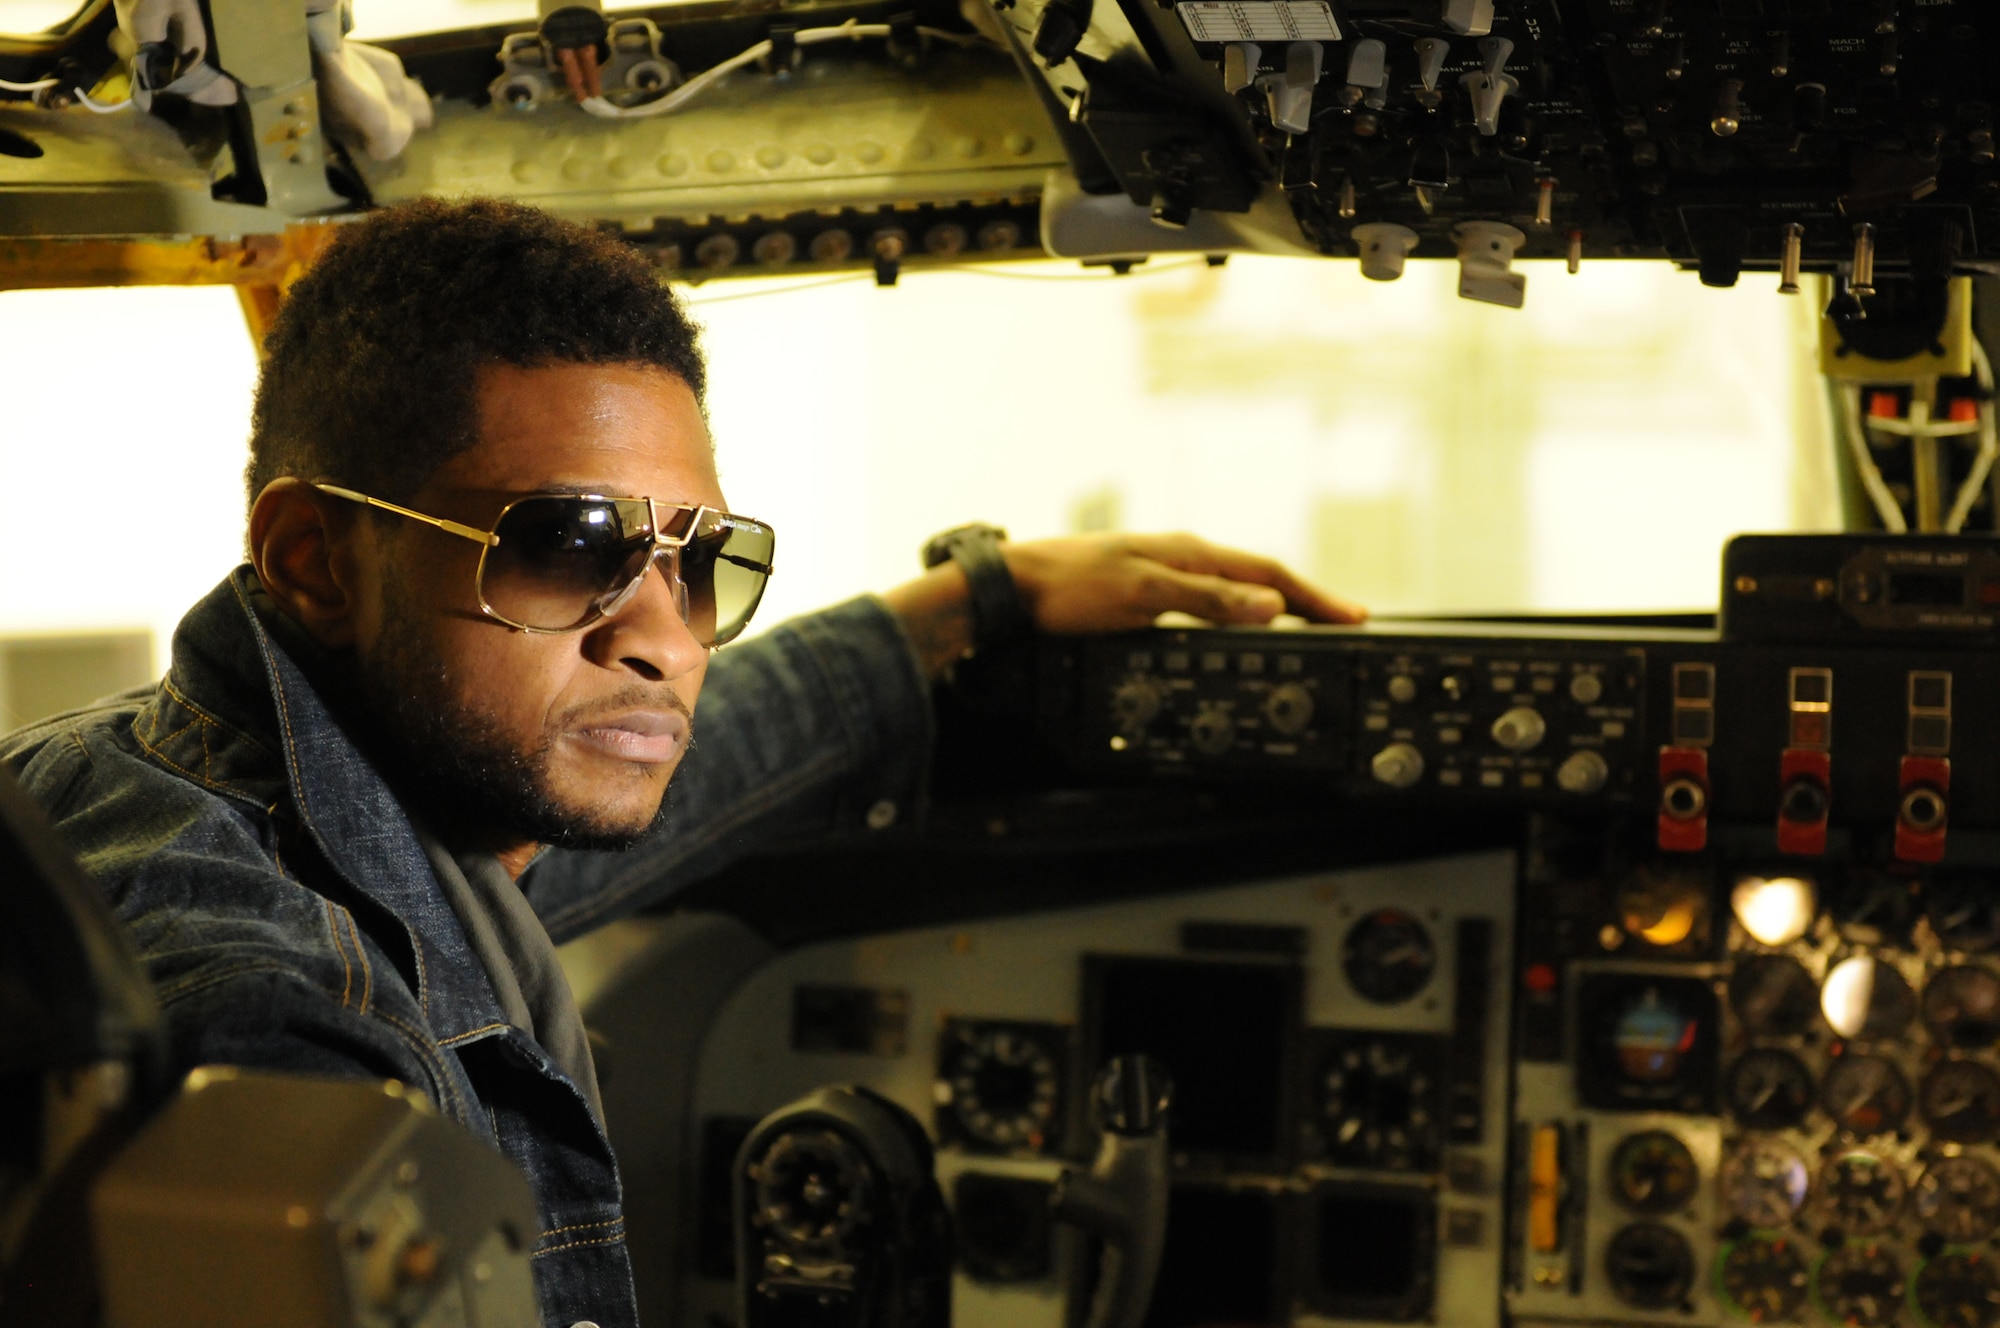 JOINT BASE ANDREWS, Md. -- R&B artist, Usher, visited the 459th Air Refueling Wing and was given a tour of a KC-135 Stratotanker along with other faciltiies here Dec. 17. During his visit, Usher also met with servicemembers and personally thanked them for defending the country. Later that evening he performed in a concert at the Verizon Center in Washington DC. (U.S. Air Force photo/Tech. Sgt. Steve Lewis)